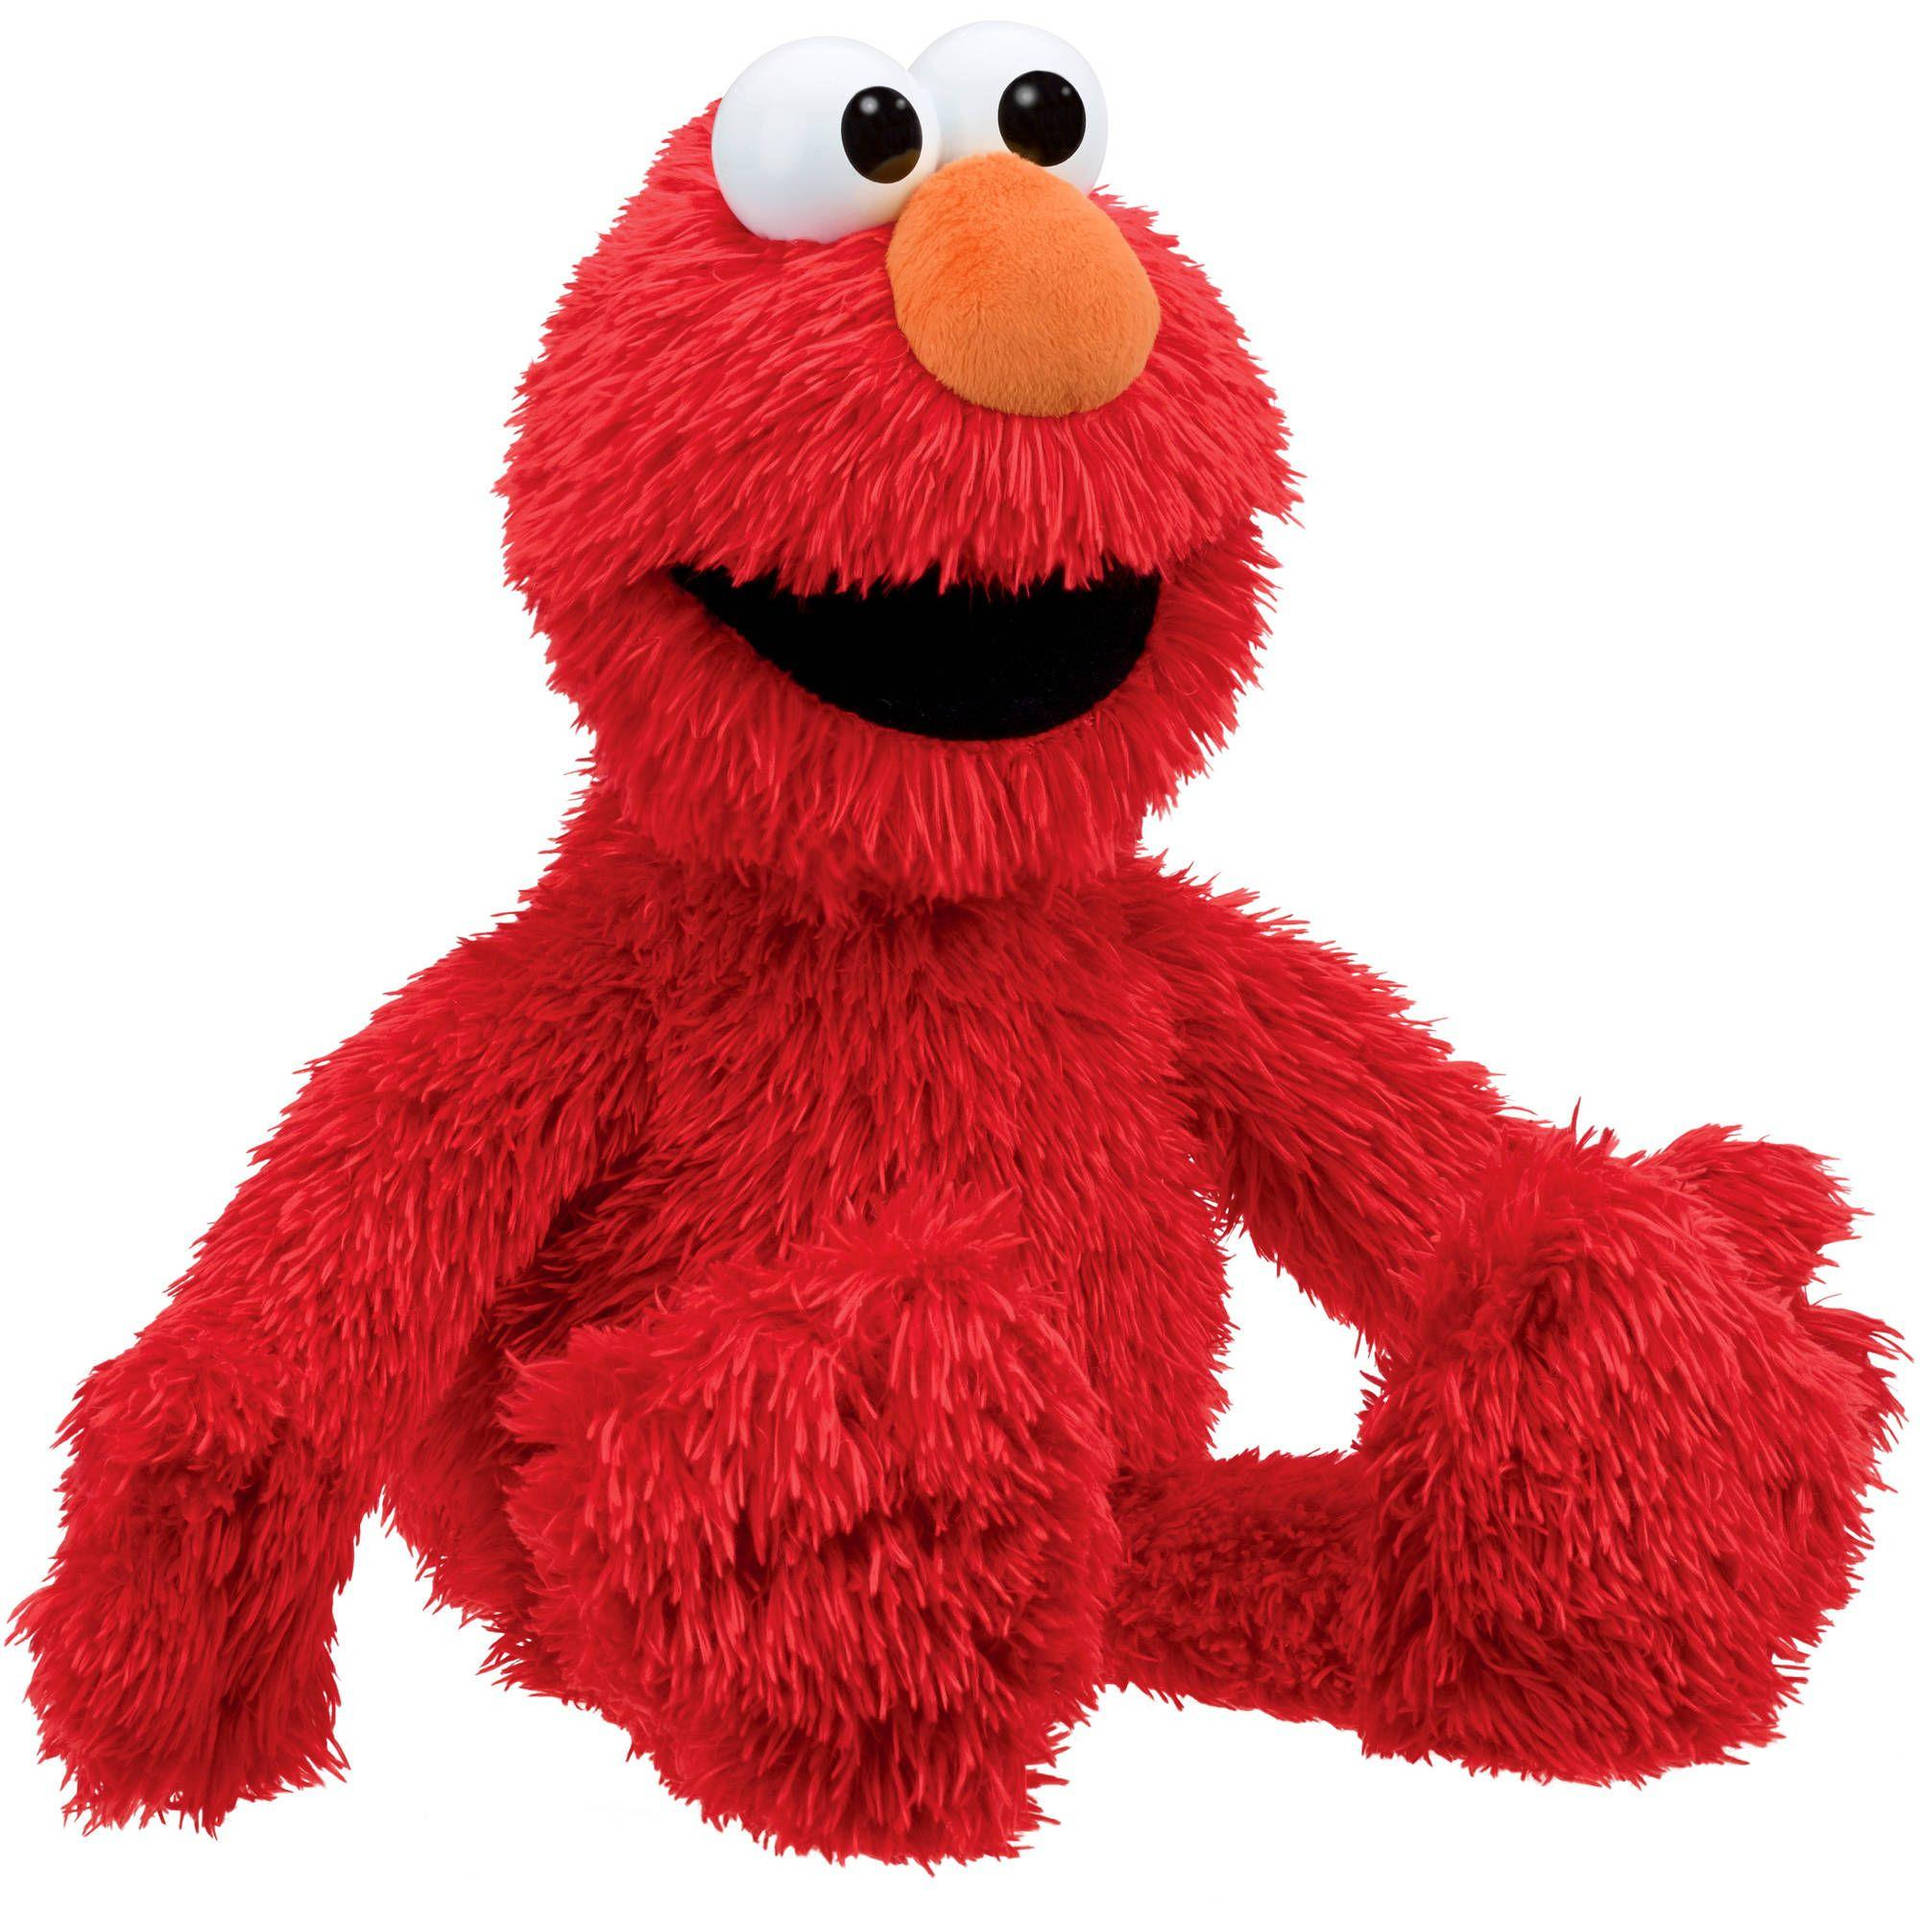 Elmo 2000X2000 Wallpaper and Background Image